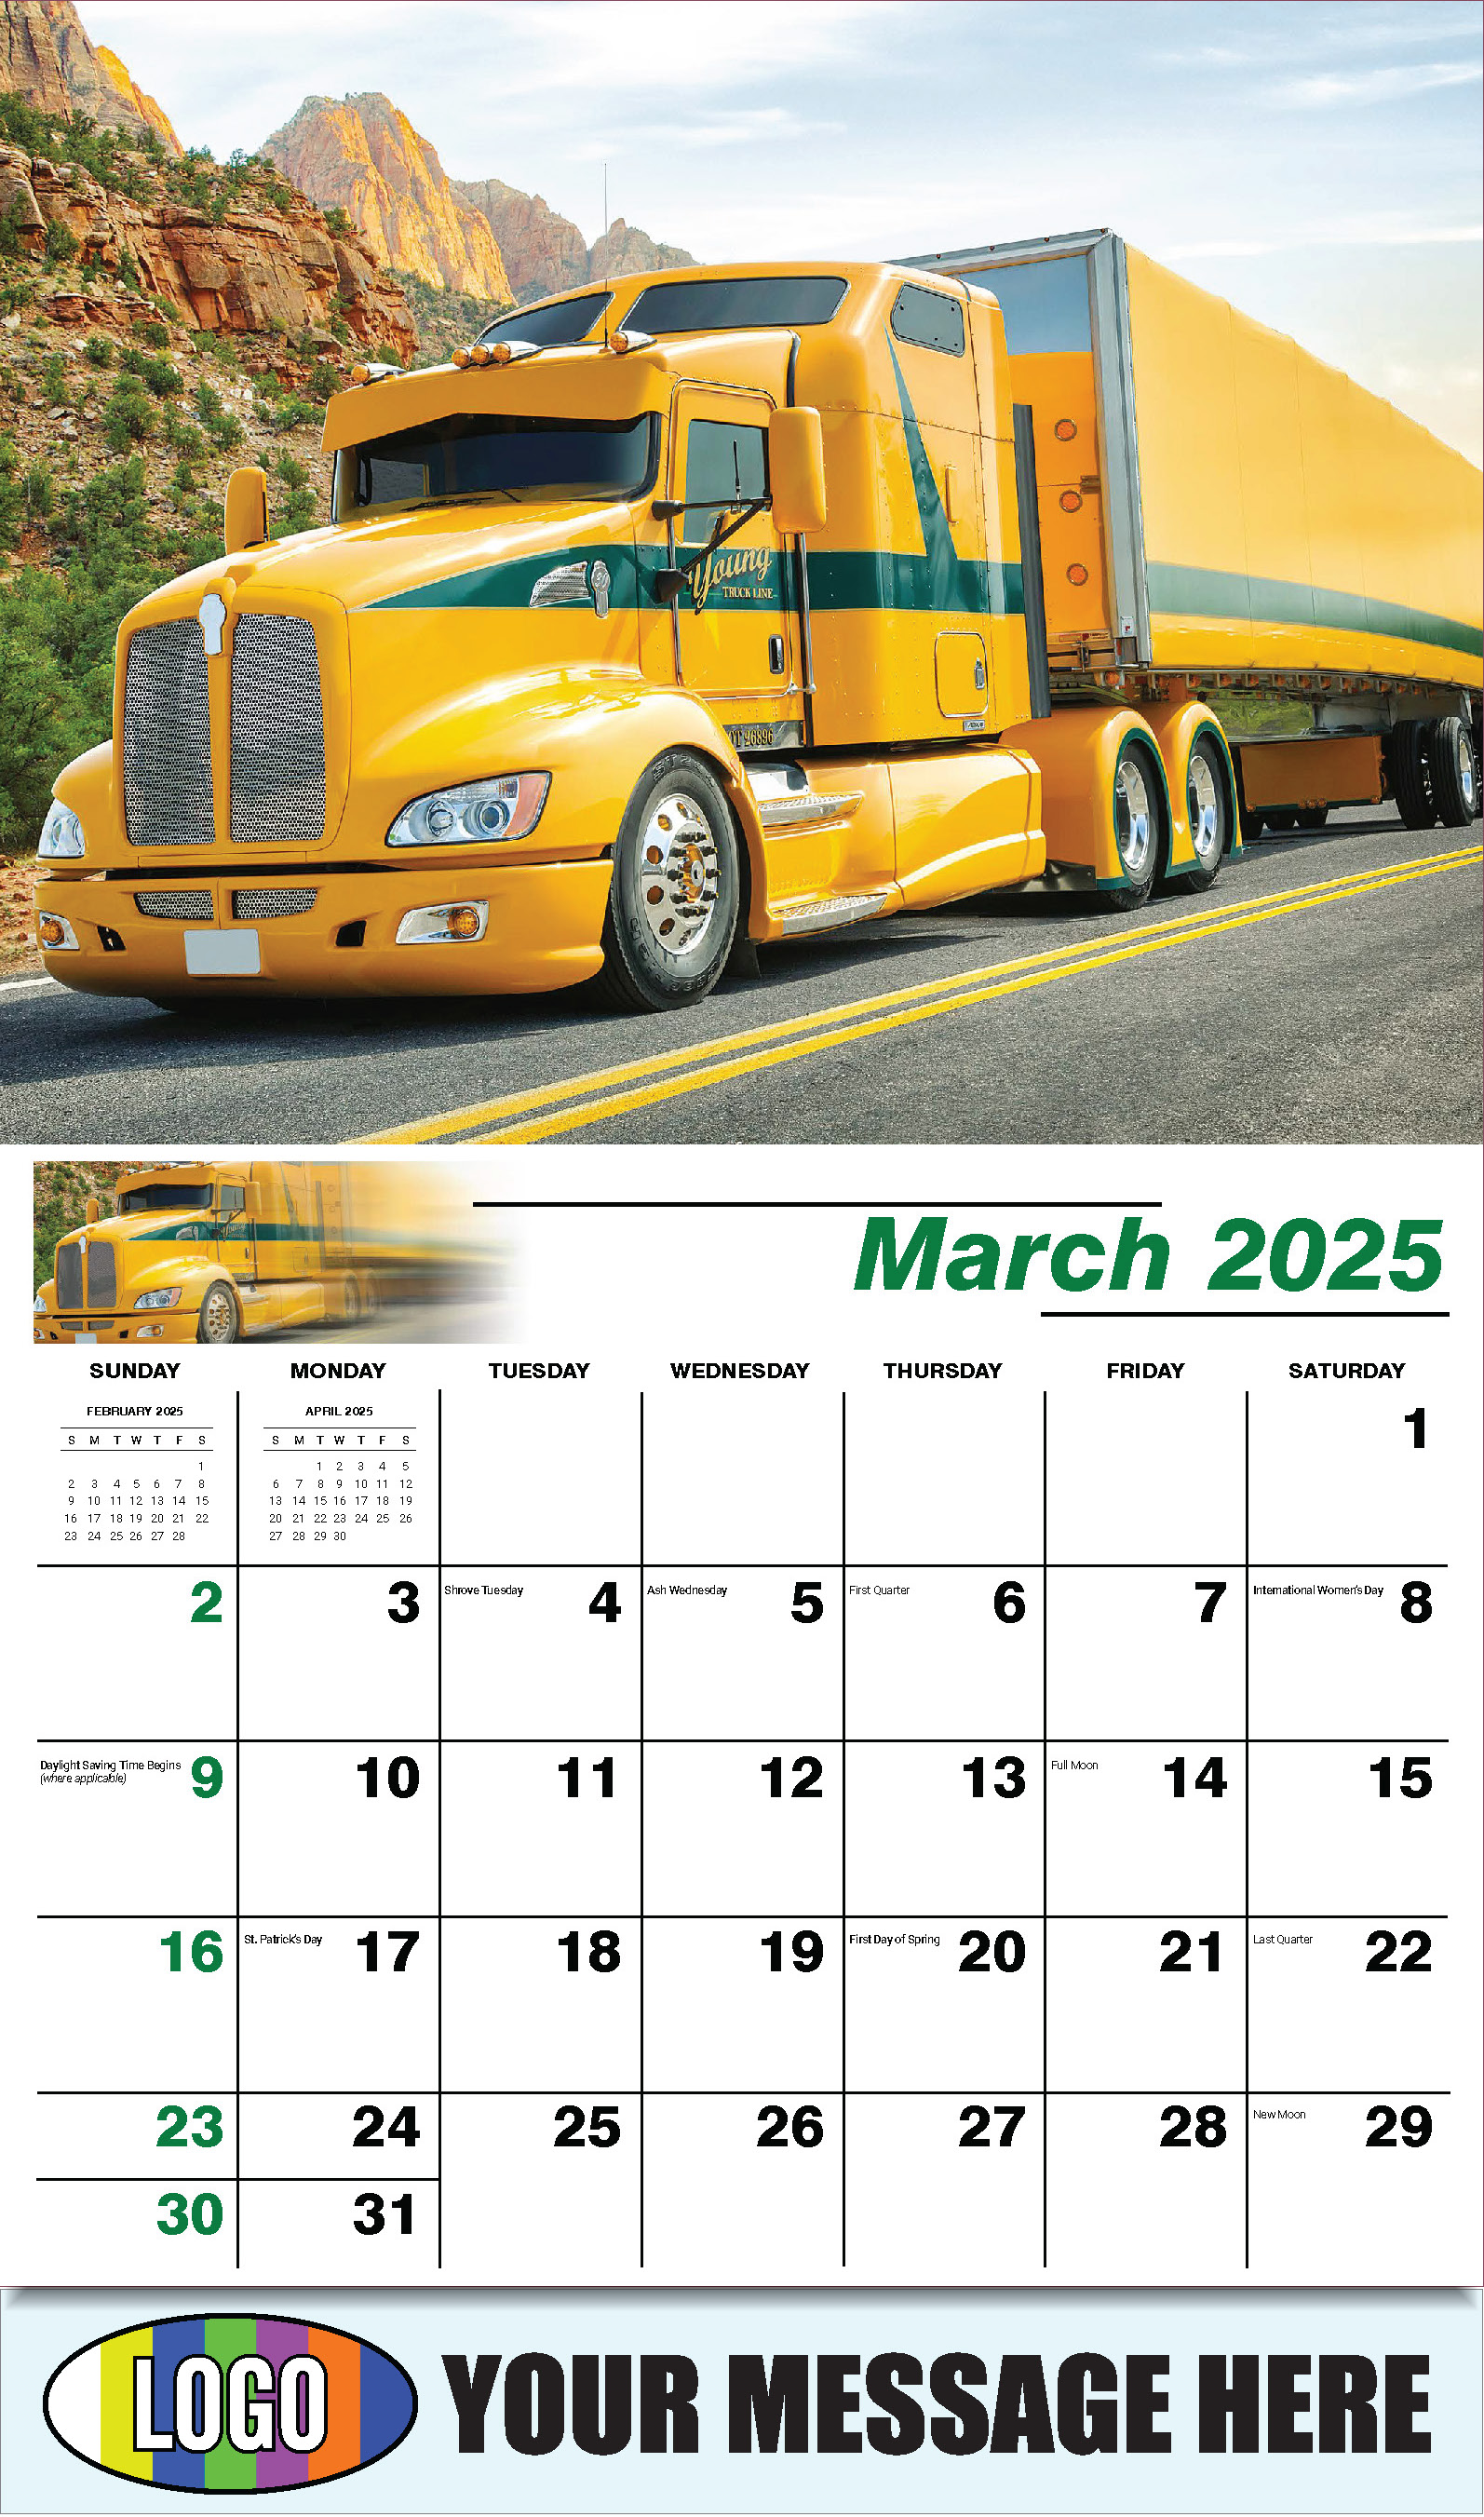 Kings of the Road 2025 Automotive Business Promotional Calendar - March